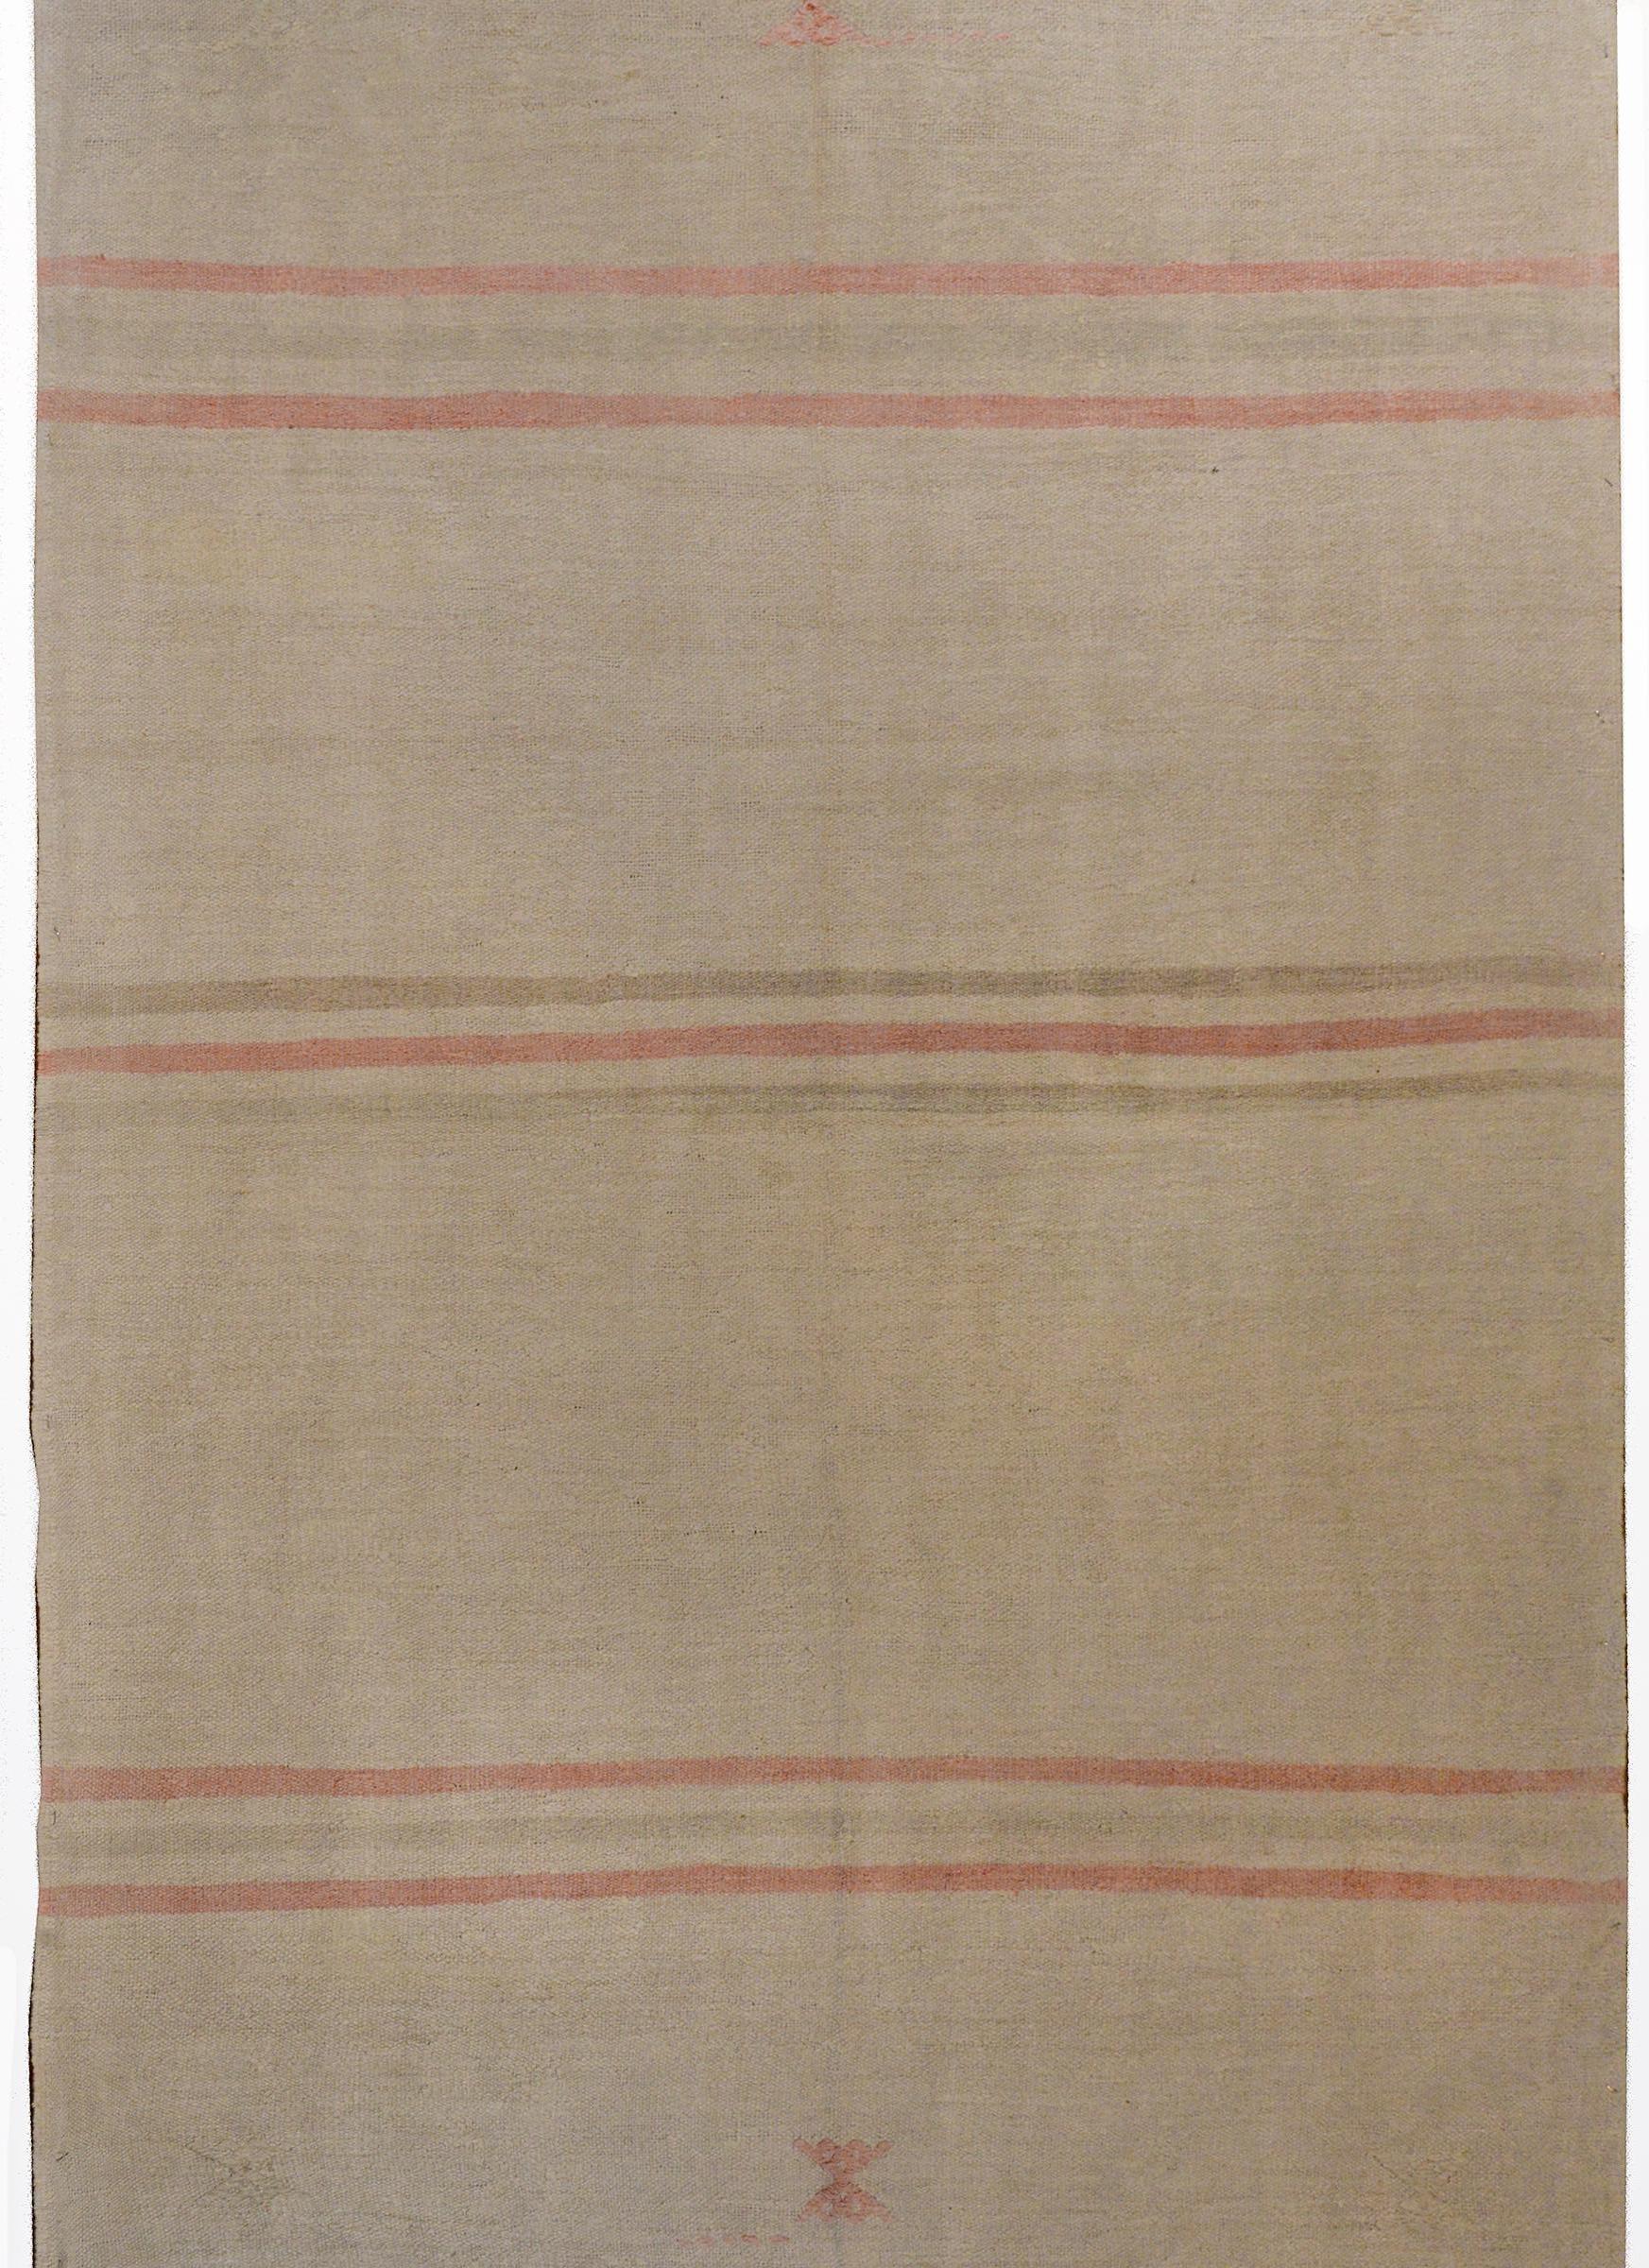 A wonderful mid-20th century Turkish Konya cotton kilim rug with a simple pattern of stylized flowers and stripes woven in pale crimson and green vegetable dyed cotton on a natural undyed cream wool background.